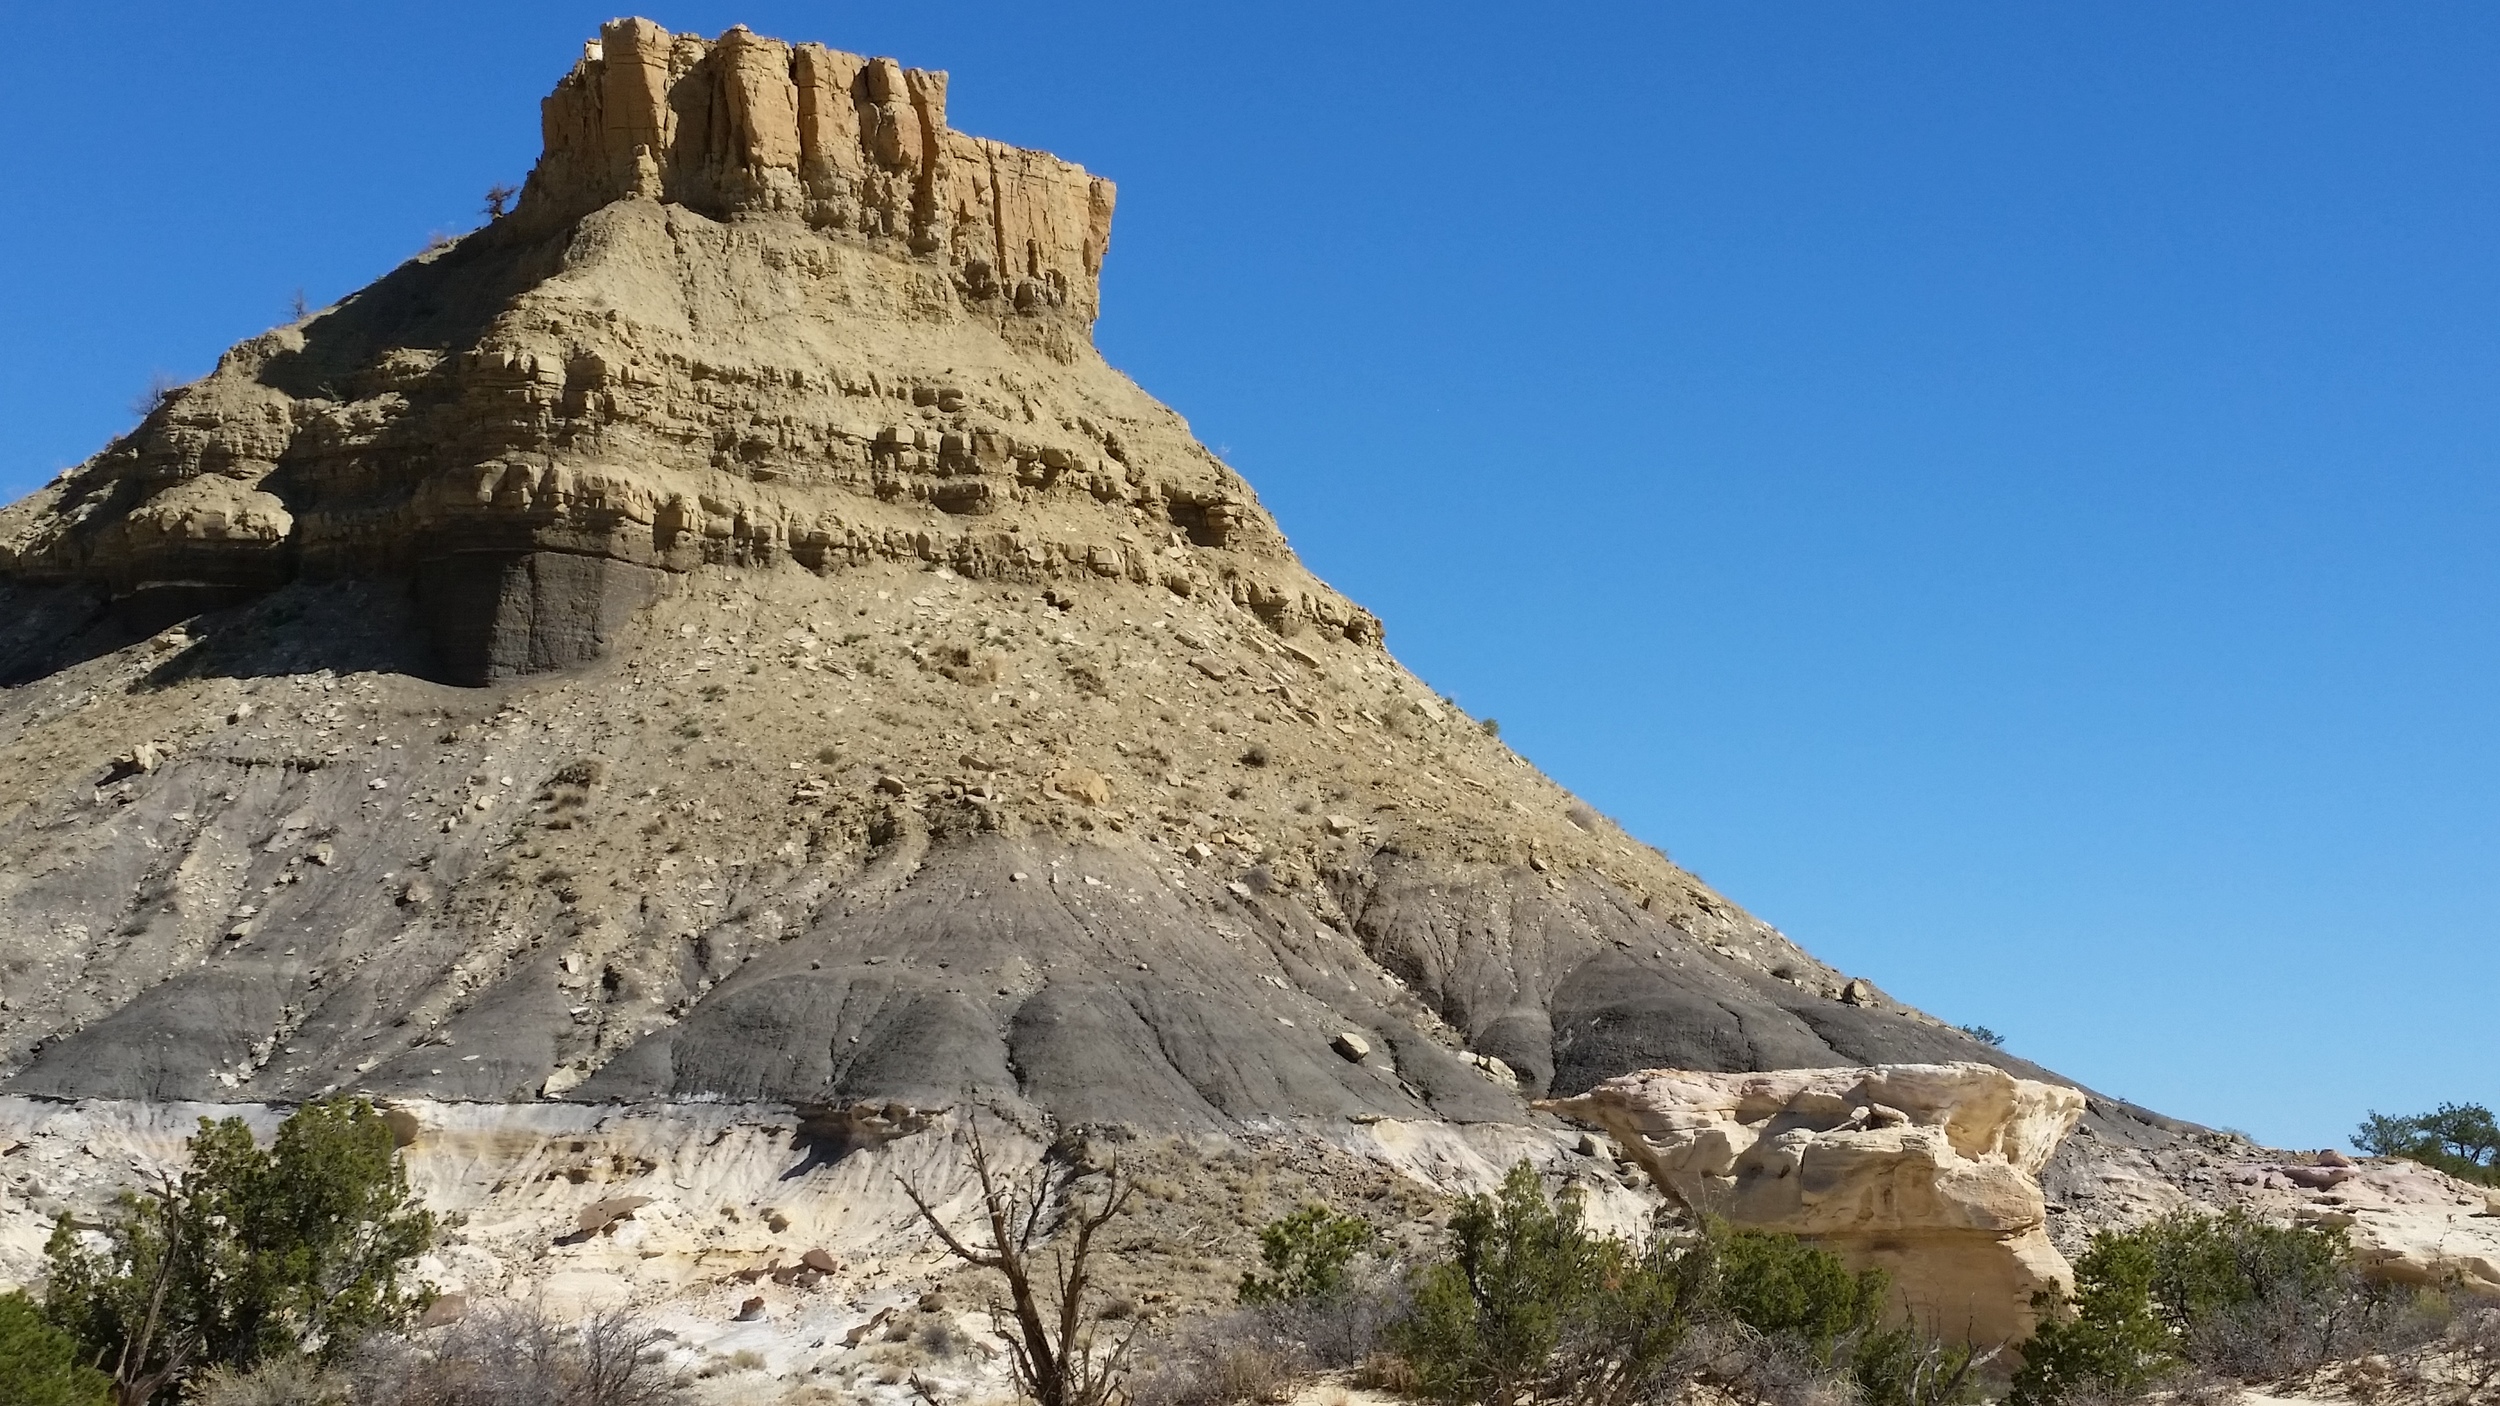  A butte of bentonite hills with a sandstone cap. 